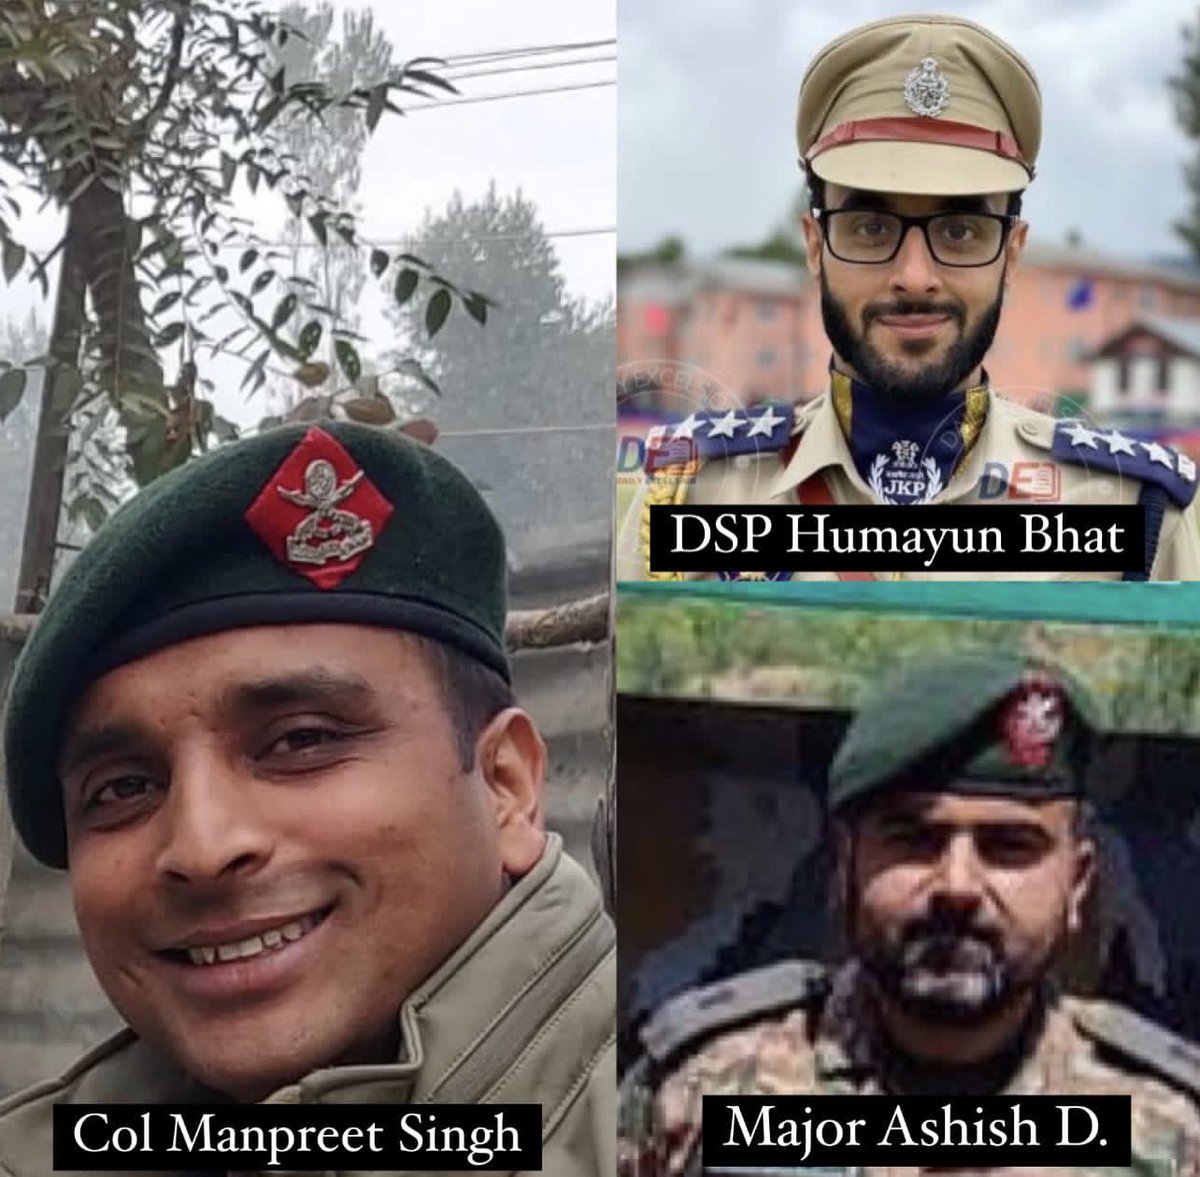 I offer my deepest and most heartfelt tributes to the valiant Col Manpreet Singh, Major Ashish, and DSP Humayun, who made the ultimate sacrifice for our beloved nation in the harrowing #AnantnagEncounter. Words cannot express the profound sorrow and gratitude I feel for their…